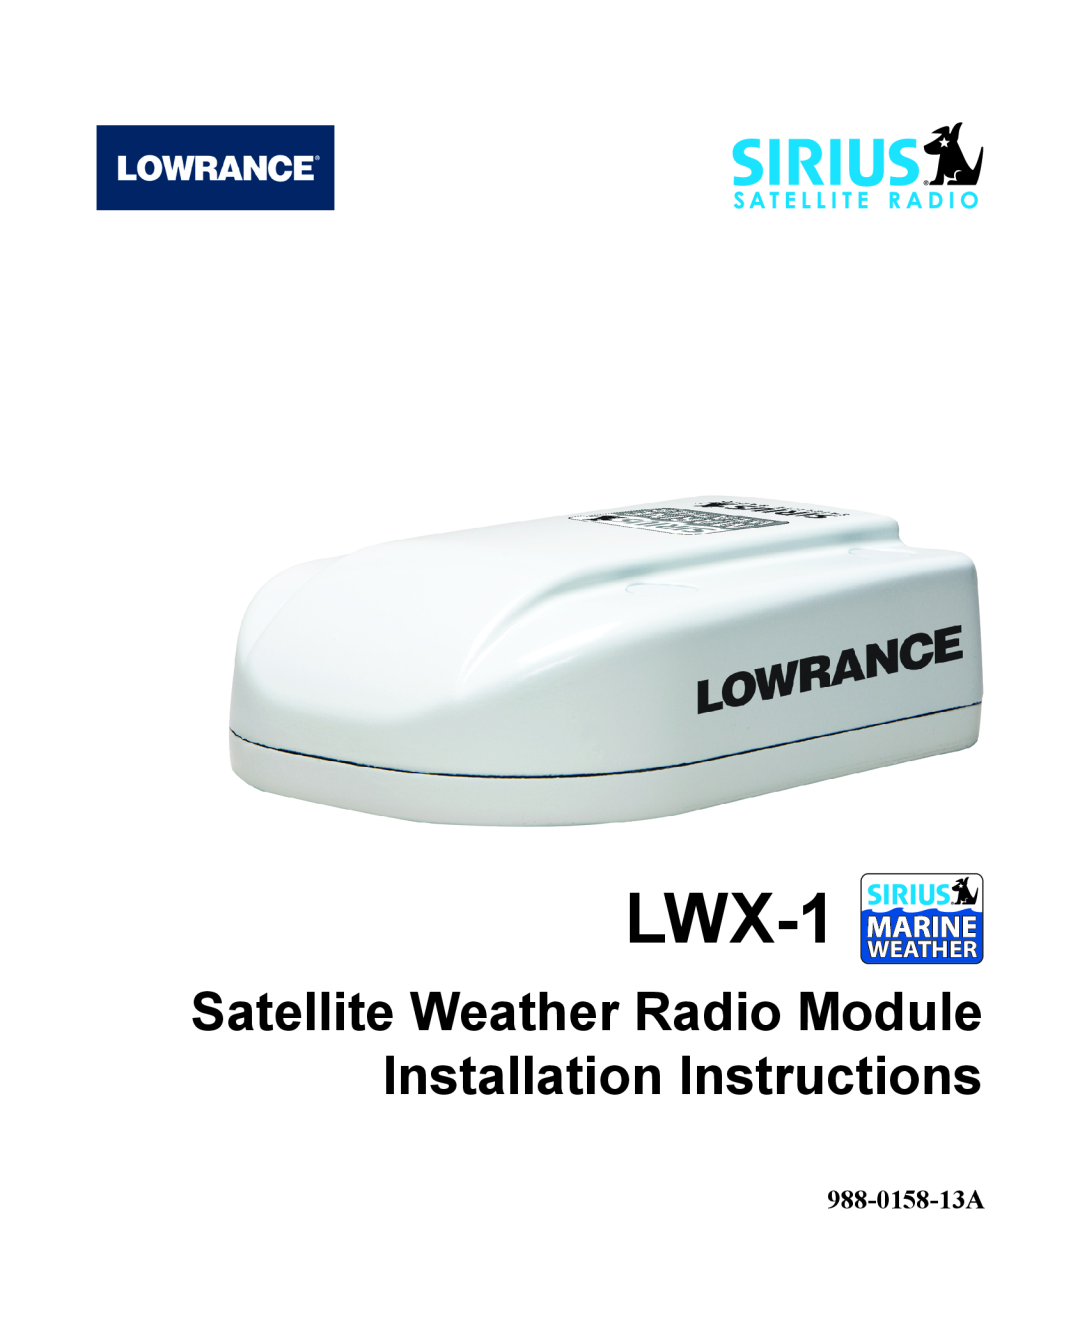 Lowrance electronic installation instructions 988-0158-13A, LWX-1 WEATHER 